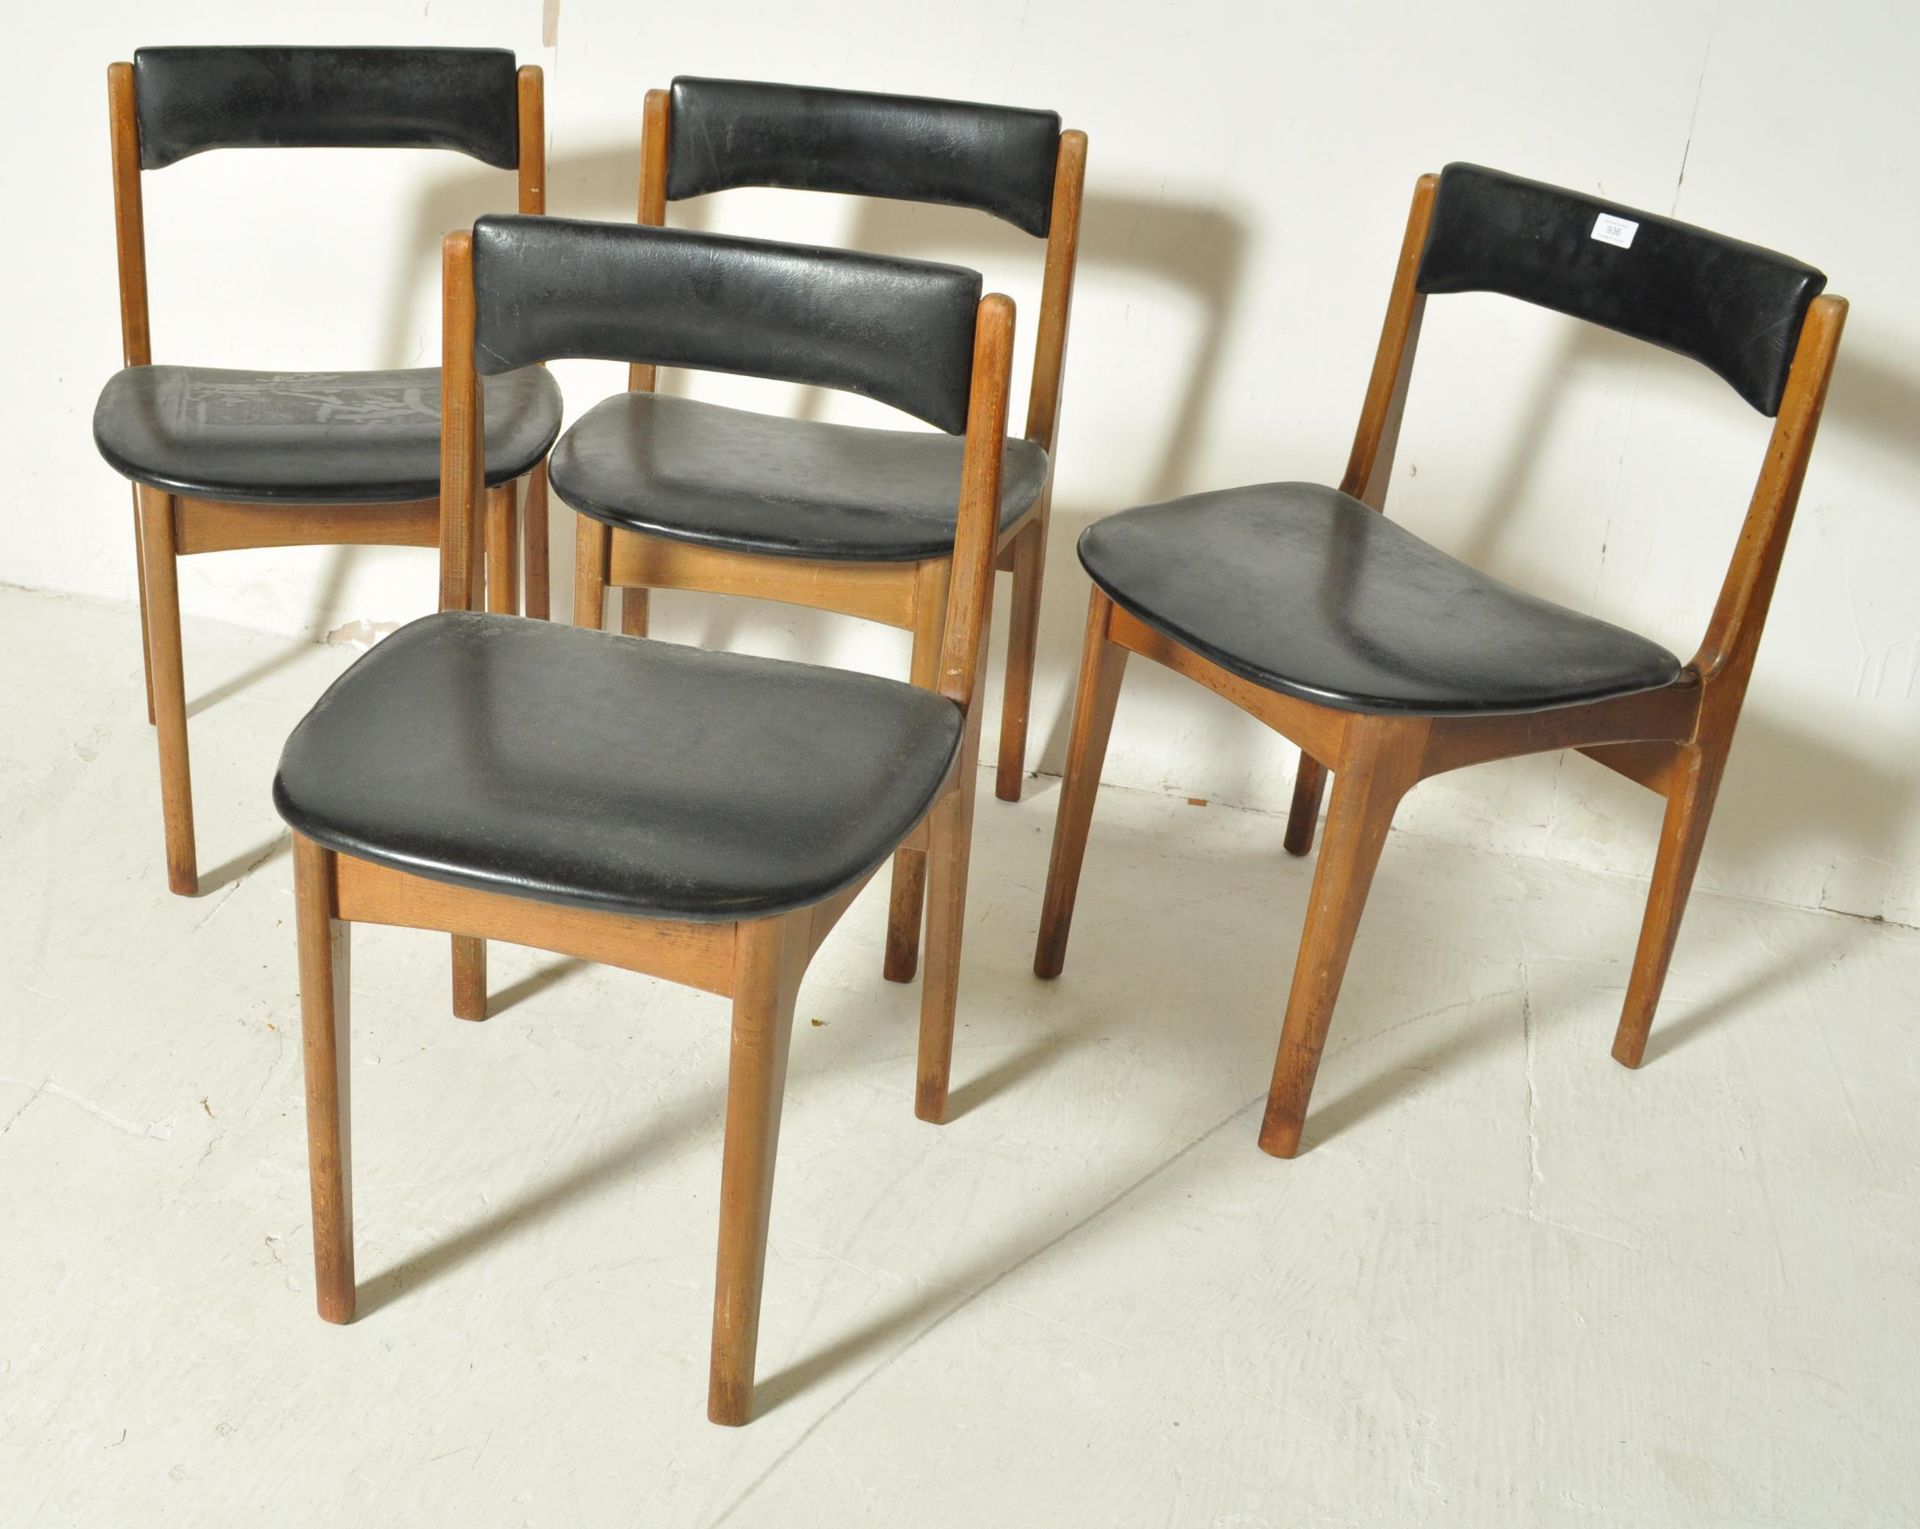 FOUR DANISH INSPIRED TEAK WOOD AND BLACK VINYL DINING CHAIRS - Image 2 of 6